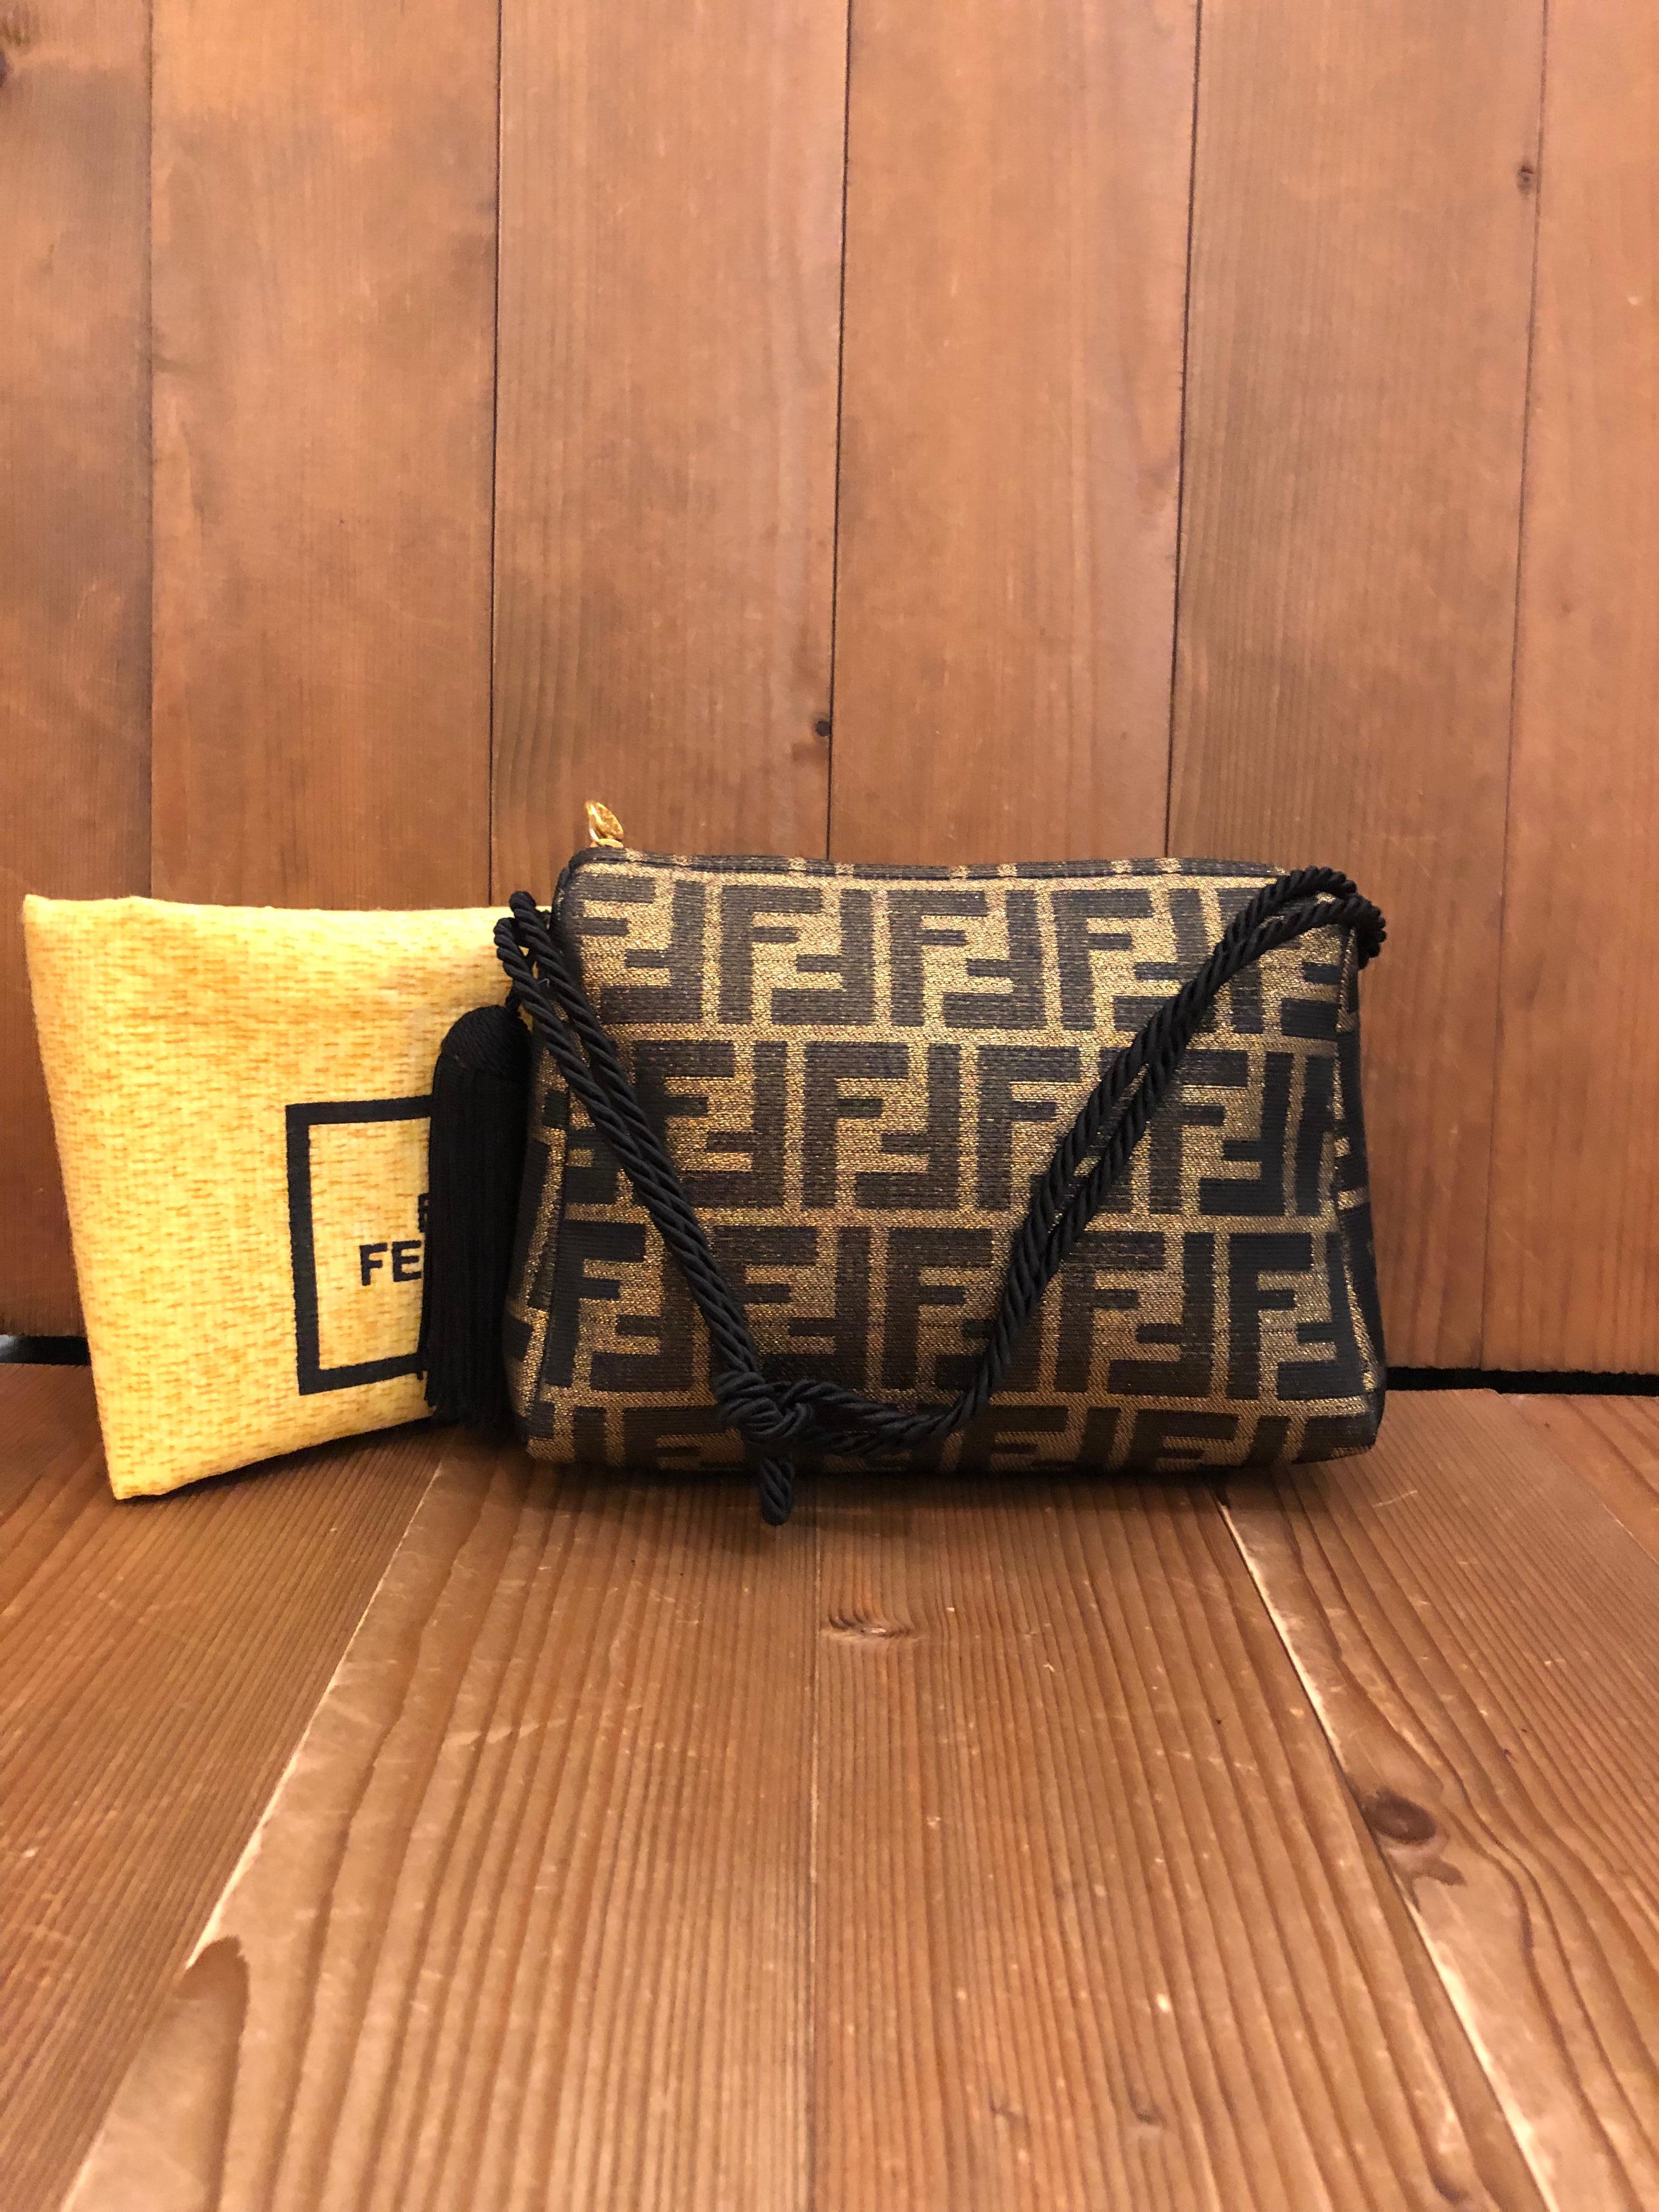 This very rare FENDI pouch handbag is crafted of Fendi's iconic Zucca jacquard in gold and black. Top zipper closure opens to a black jacquard interior featuring a patch pocket. The handle of this pouch is made out of black silk ropes tied together